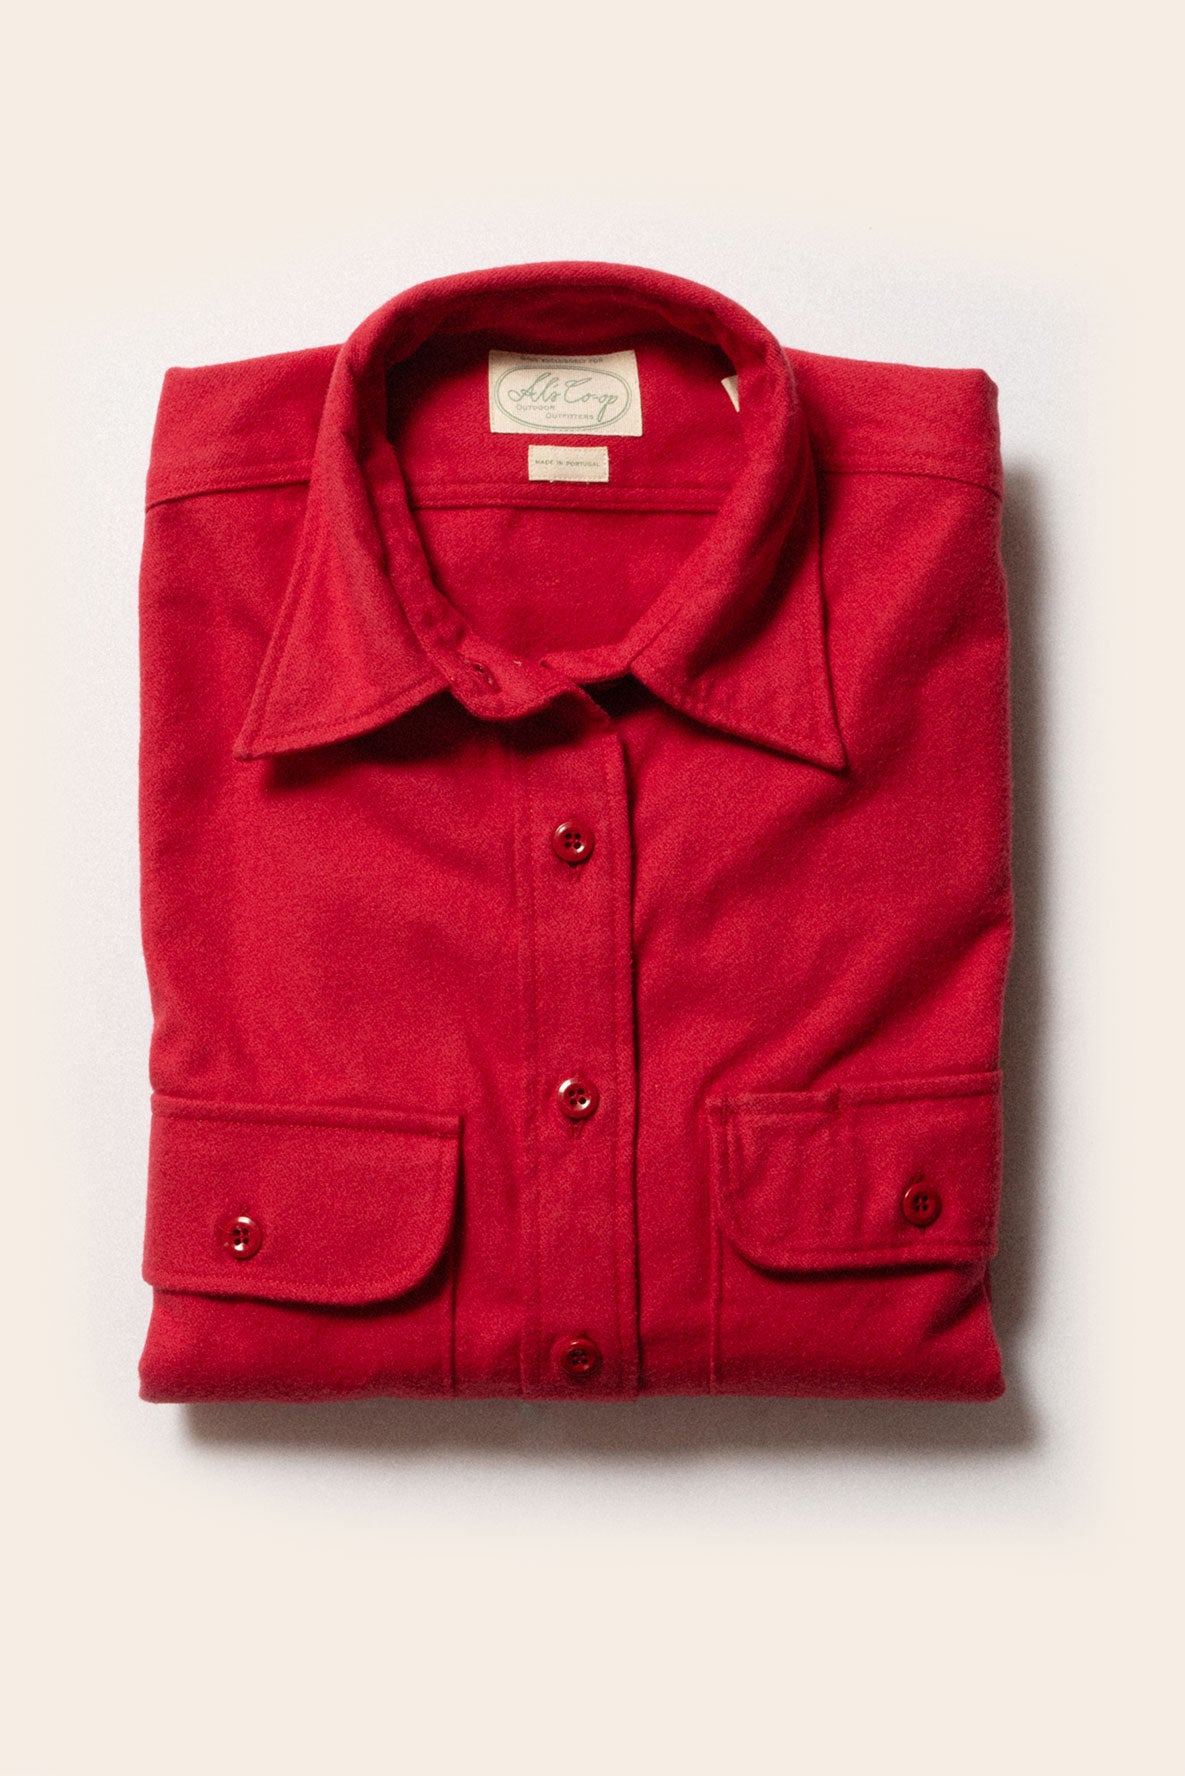 Al’s Chamois Guide Shirt in Red